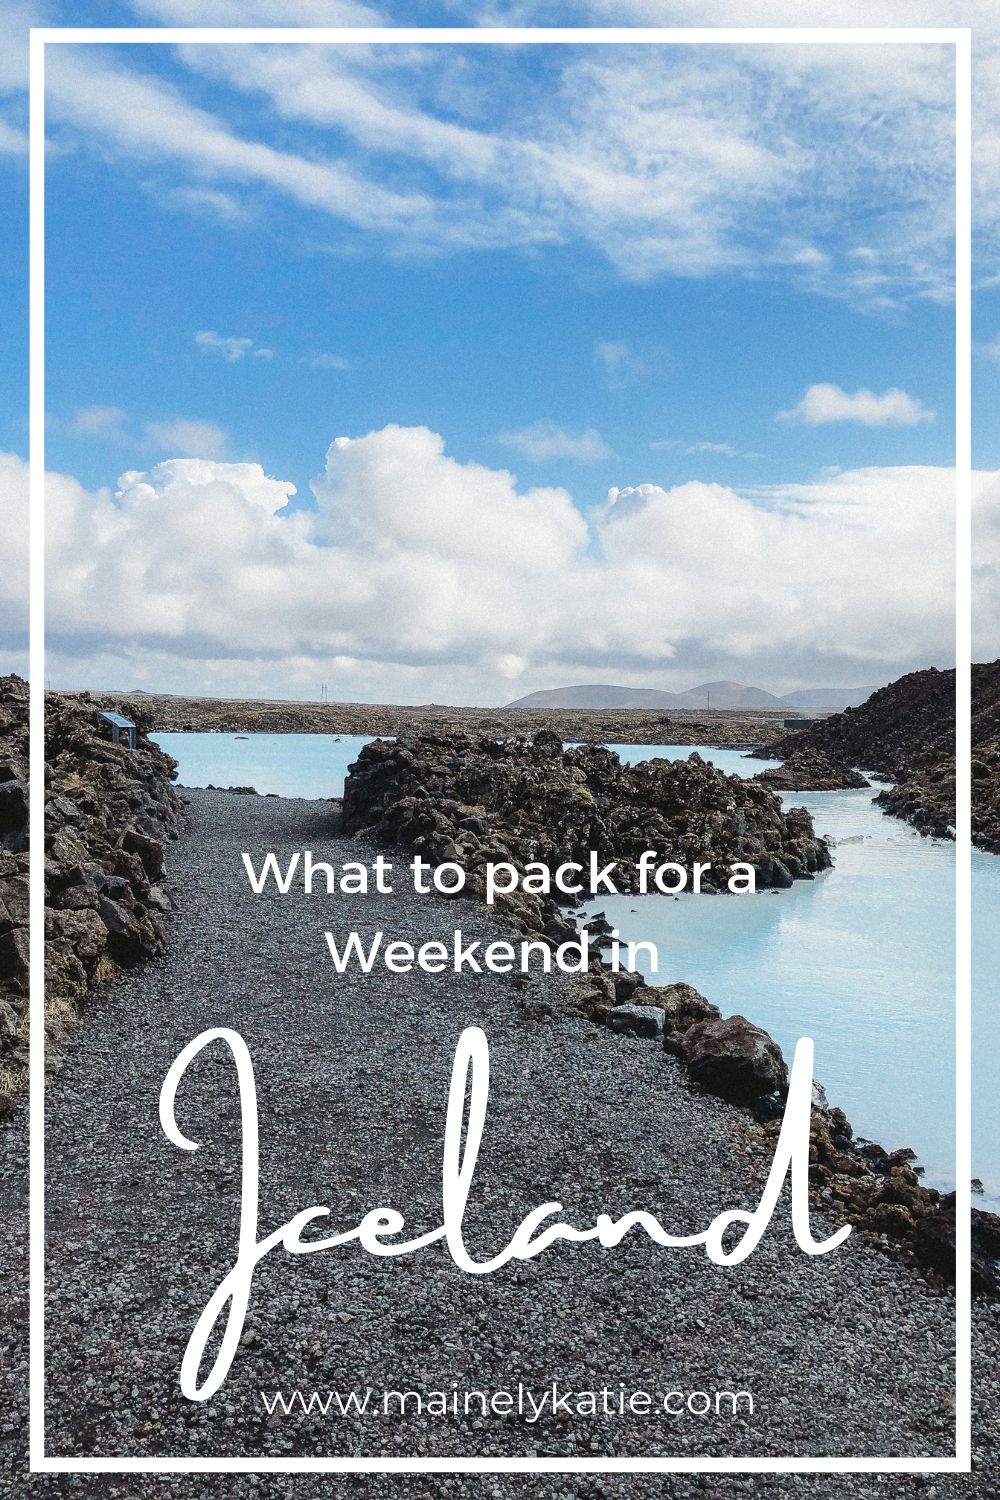 There is no doubt that Iceland is a beautiful and unique country. The weather is known to be unpredictable so to make sure that you enjoy your trip, you have to make sure you pack the right gear. I know that our first trip would have been a little more enjoyable if I was more prepared. So if you are planning a trip to Iceland here is a list of what to pack for a weekend in Iceland.